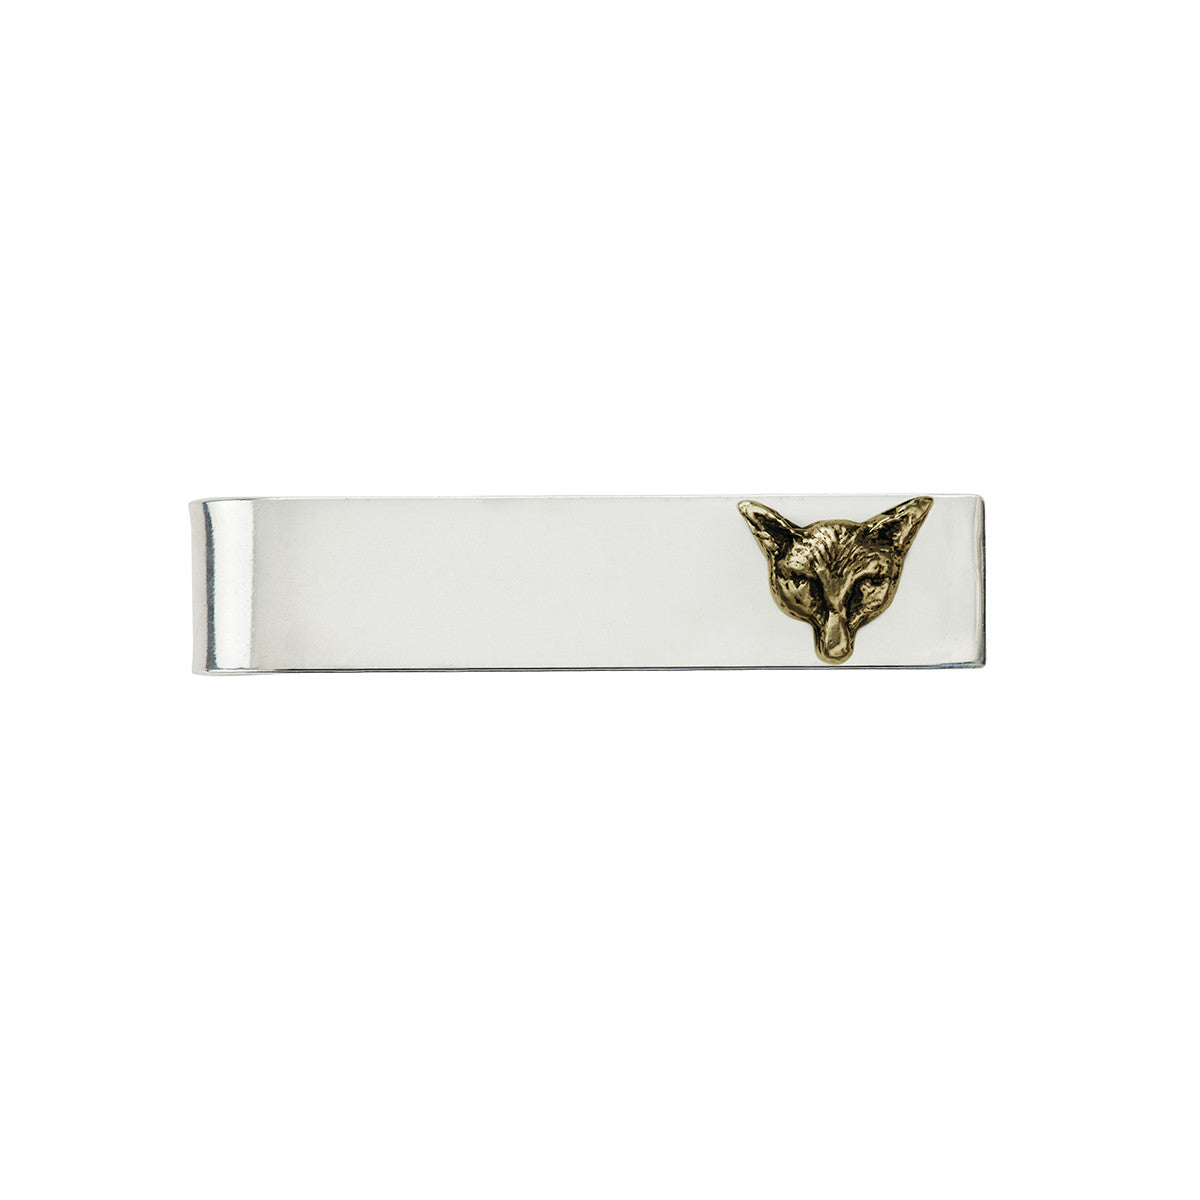 A sterling silver tie bar featuring our Fox talisman.